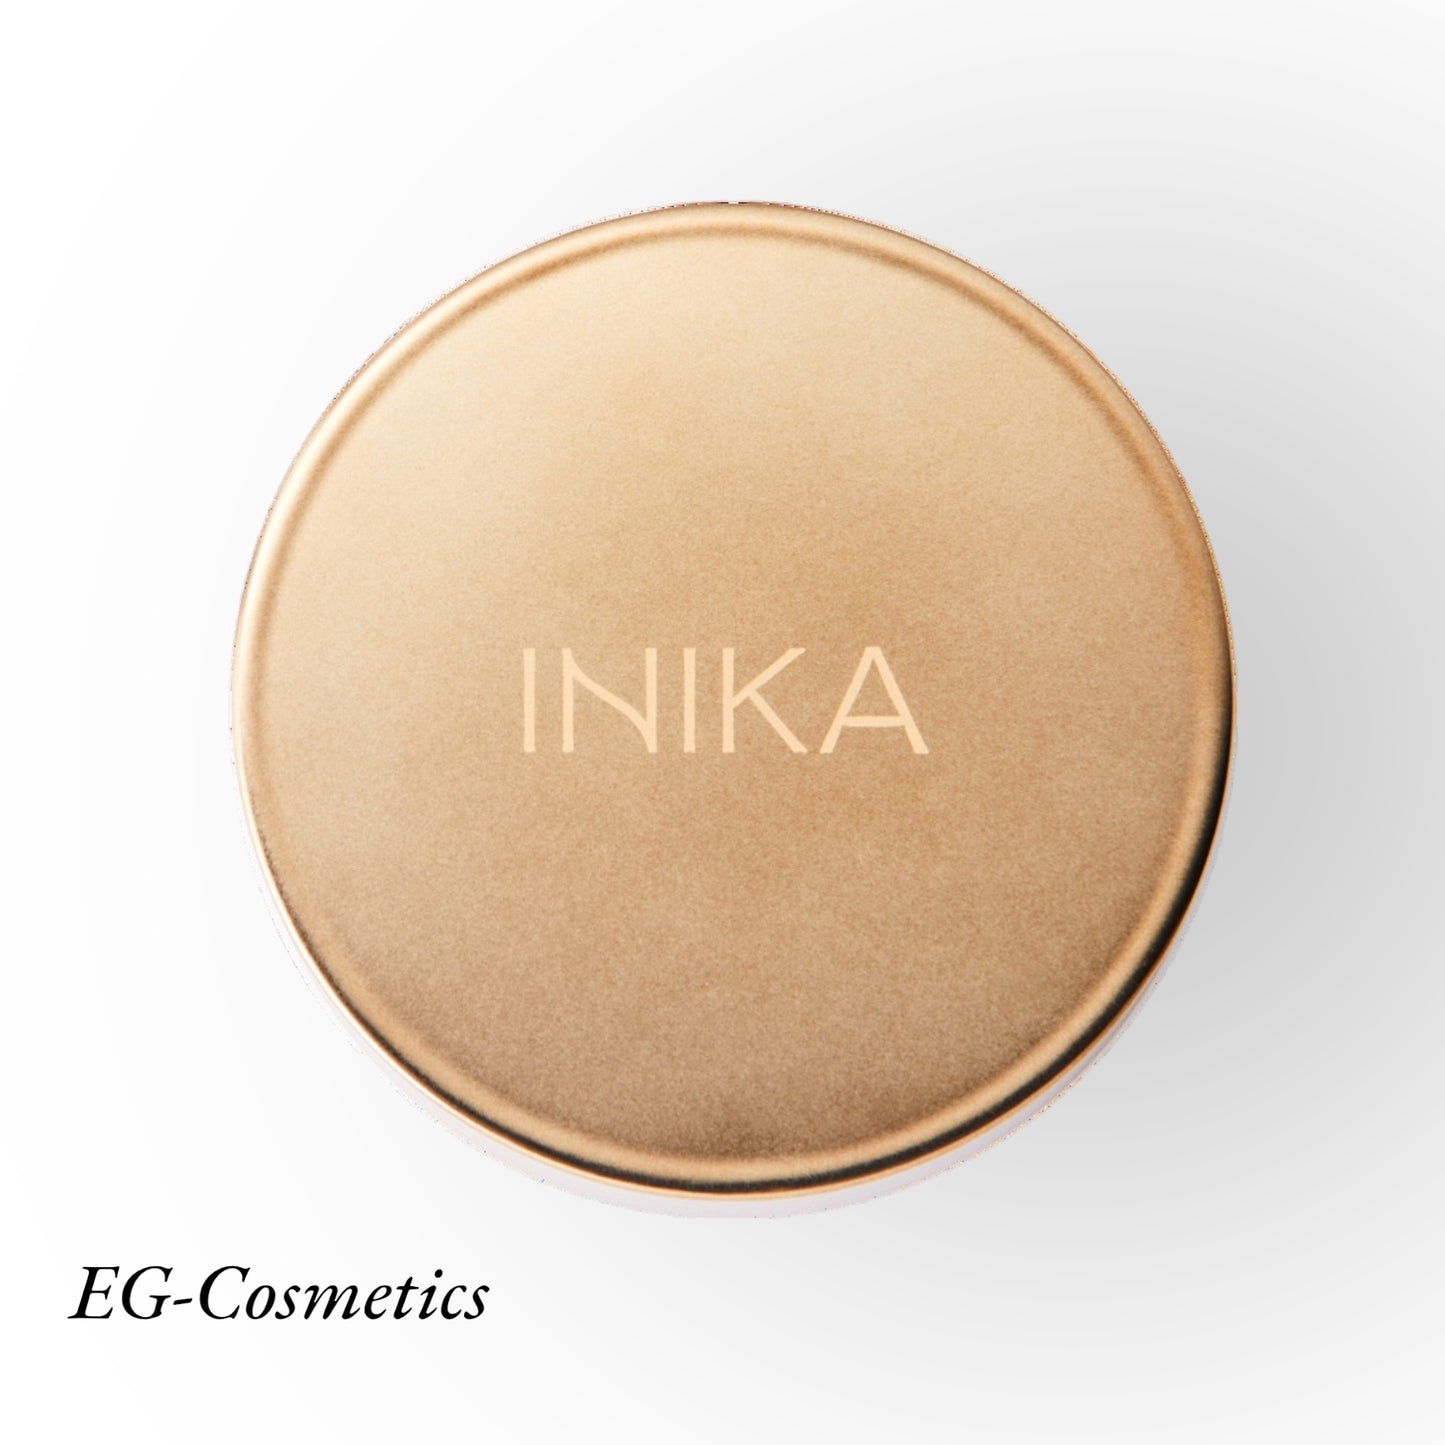 INIKA Organic Baked Mineral Bronzer (Sunkissed) 8g